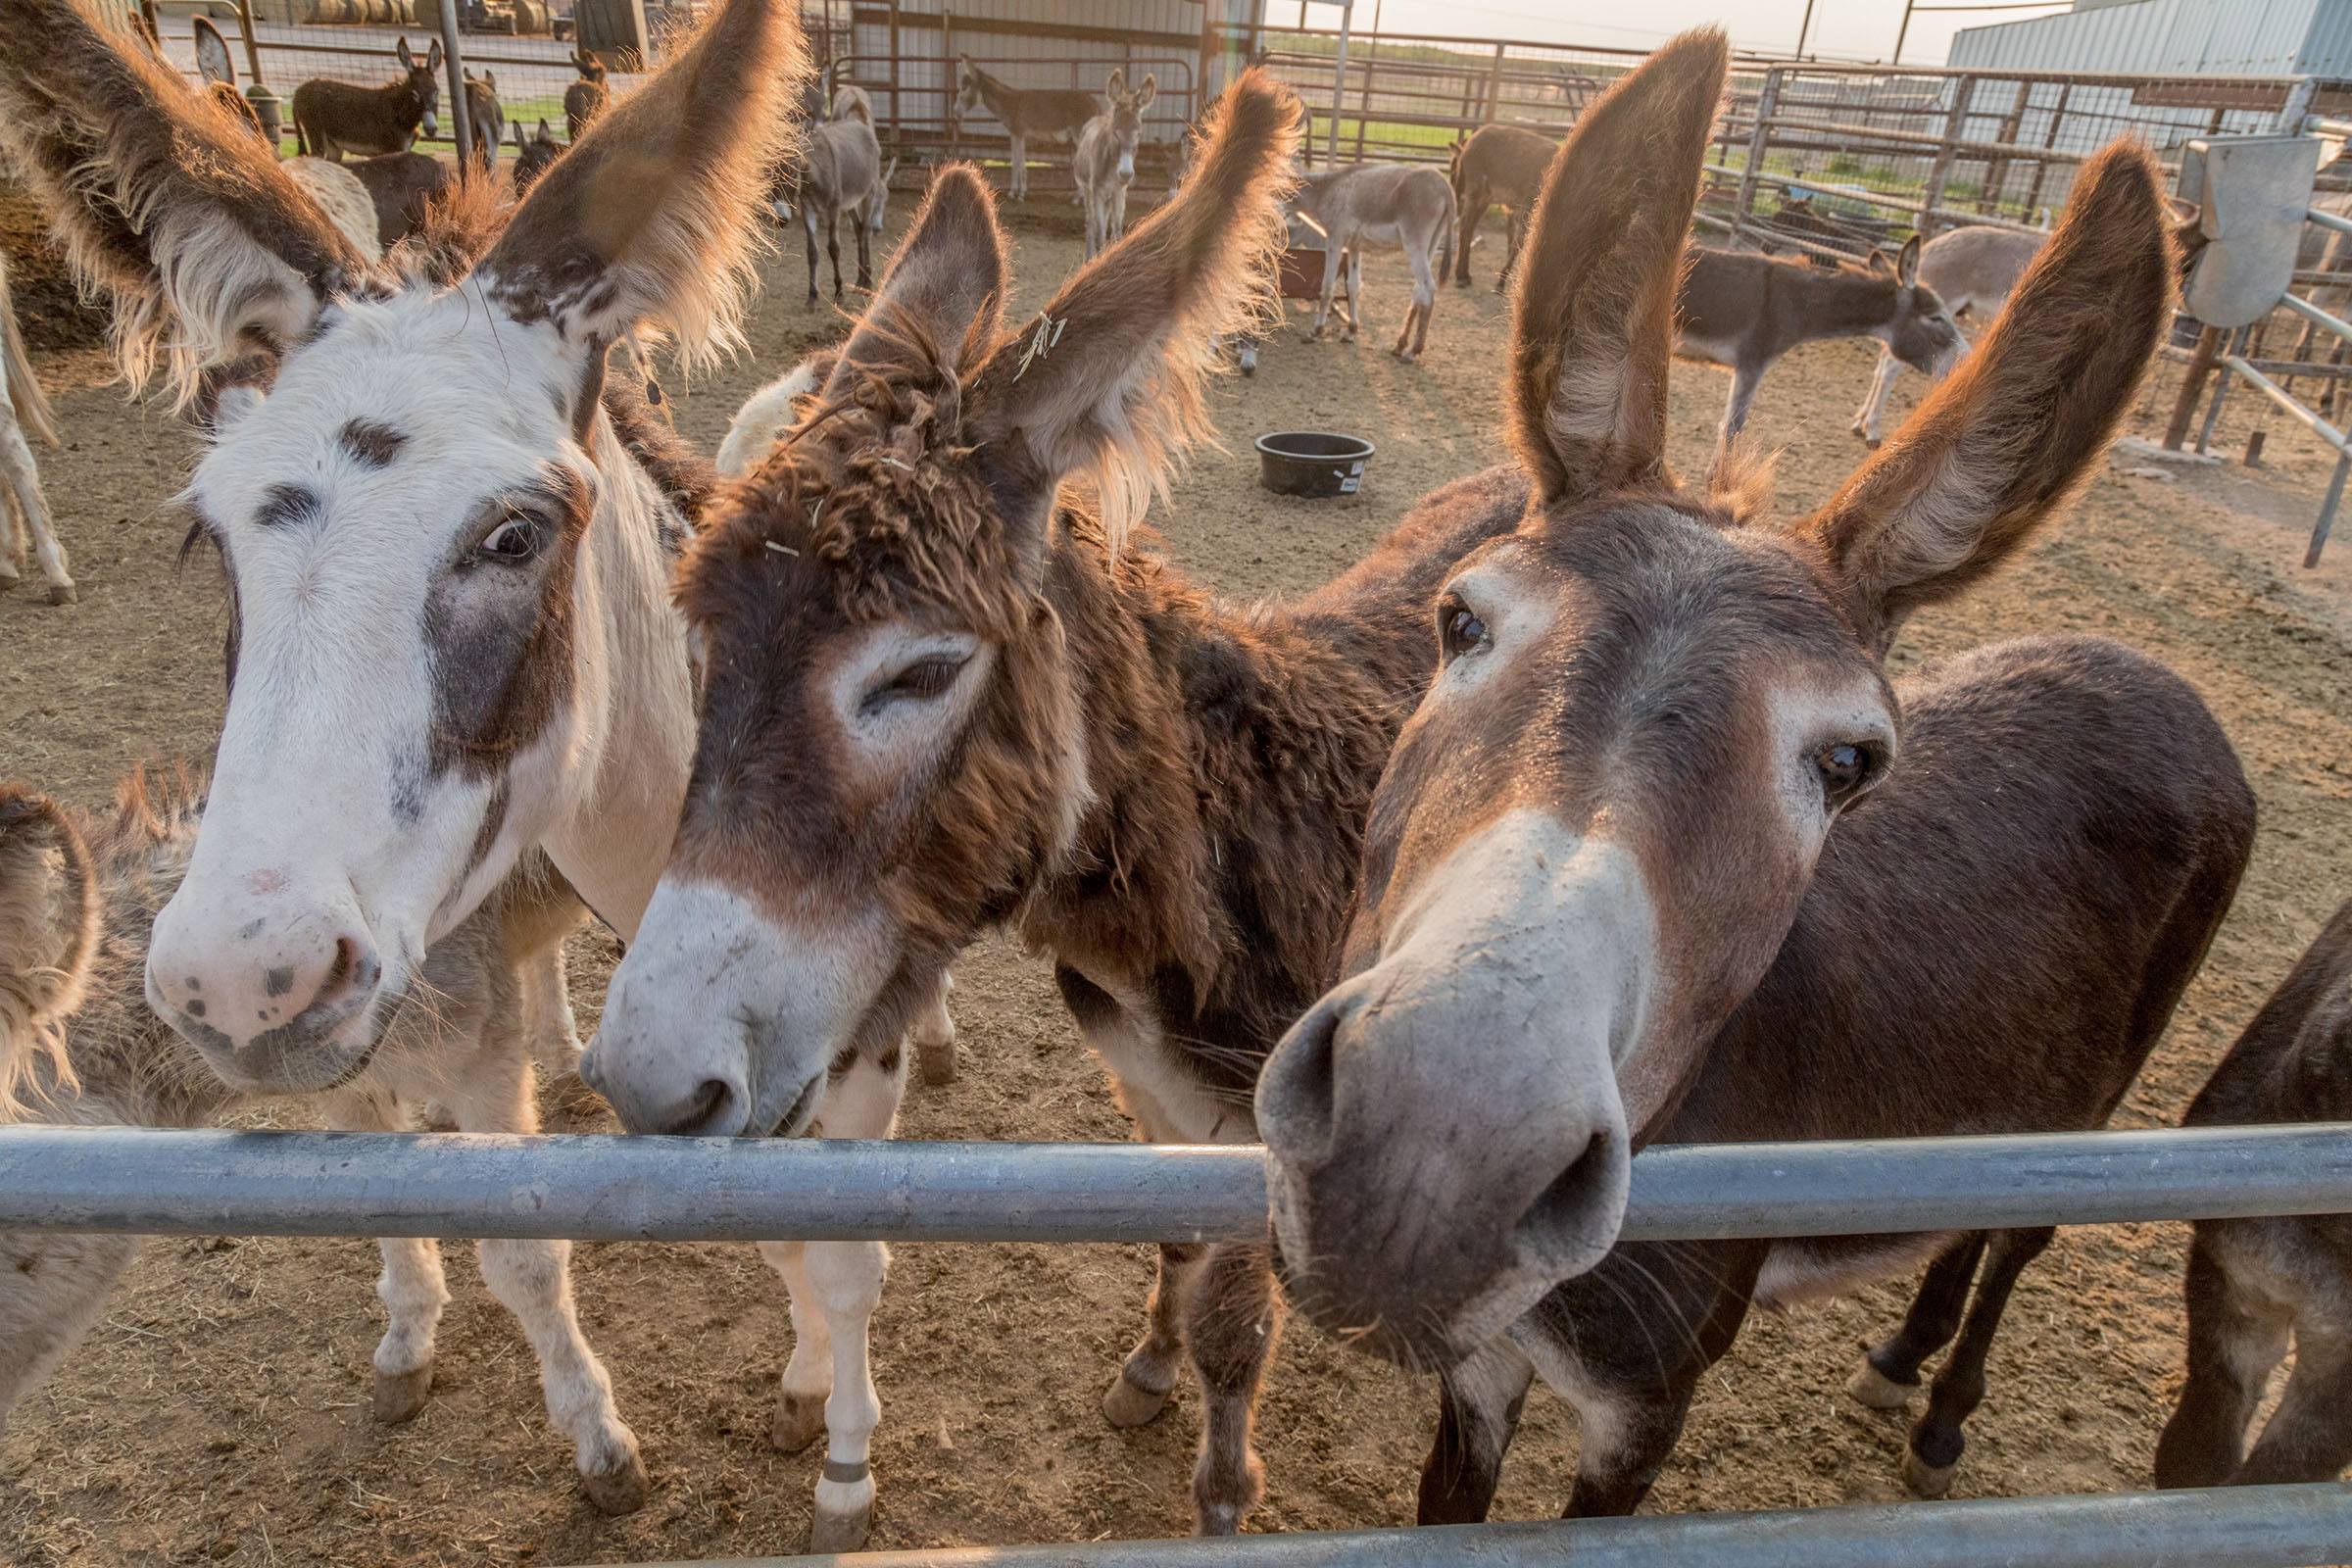 Three donkeys stand in dirt and push their muzzles towards the camera lens.